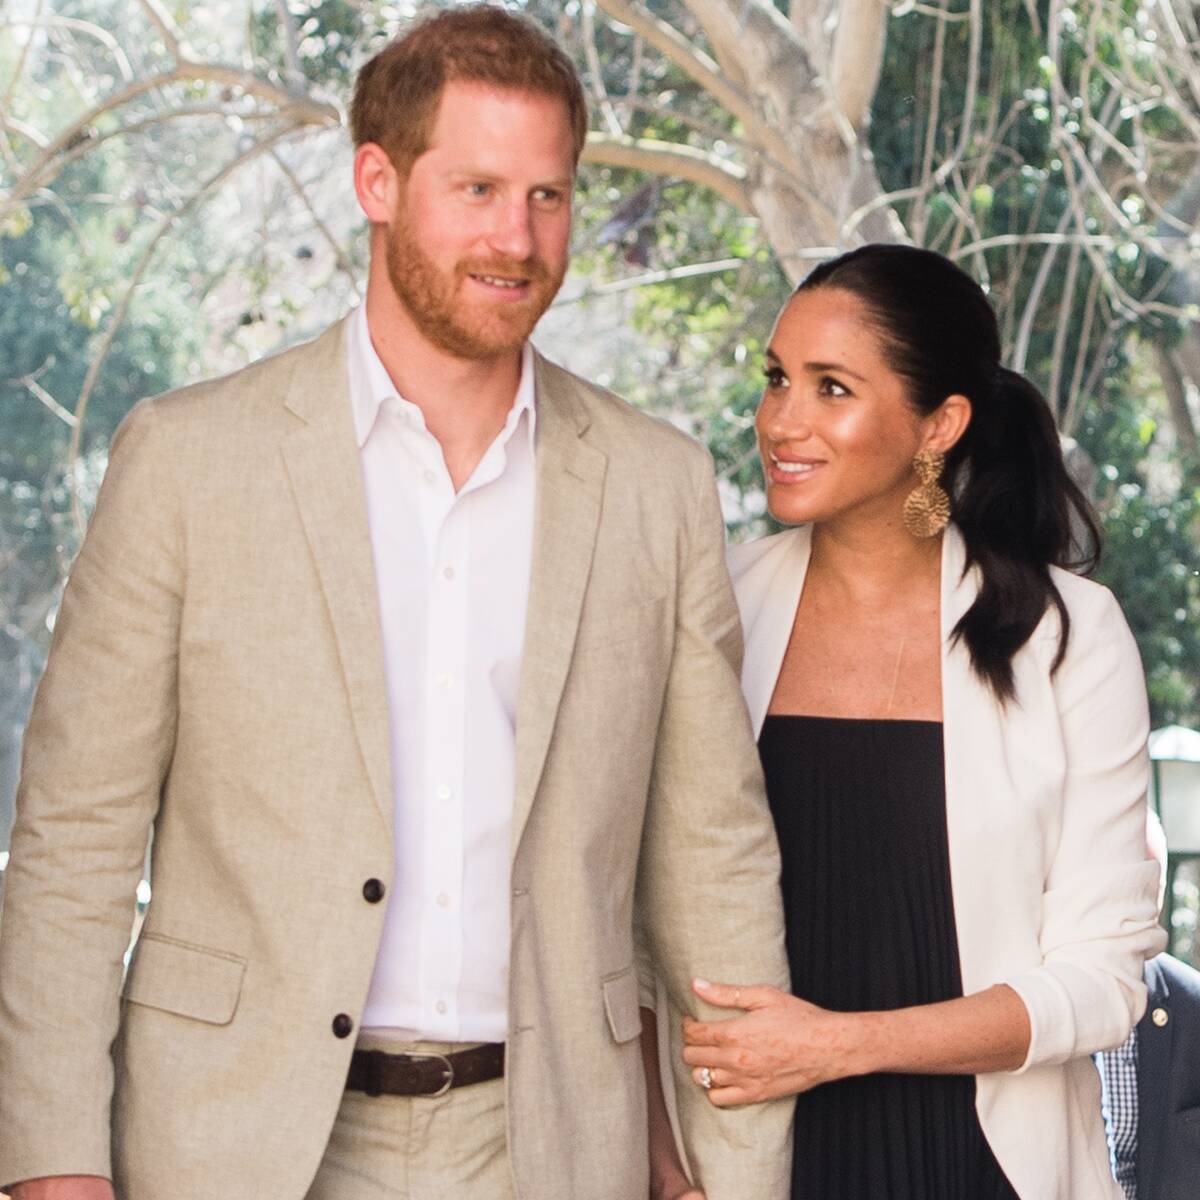 The Truth About Meghan Markle and Prince Harry's Funding After Royal Exit